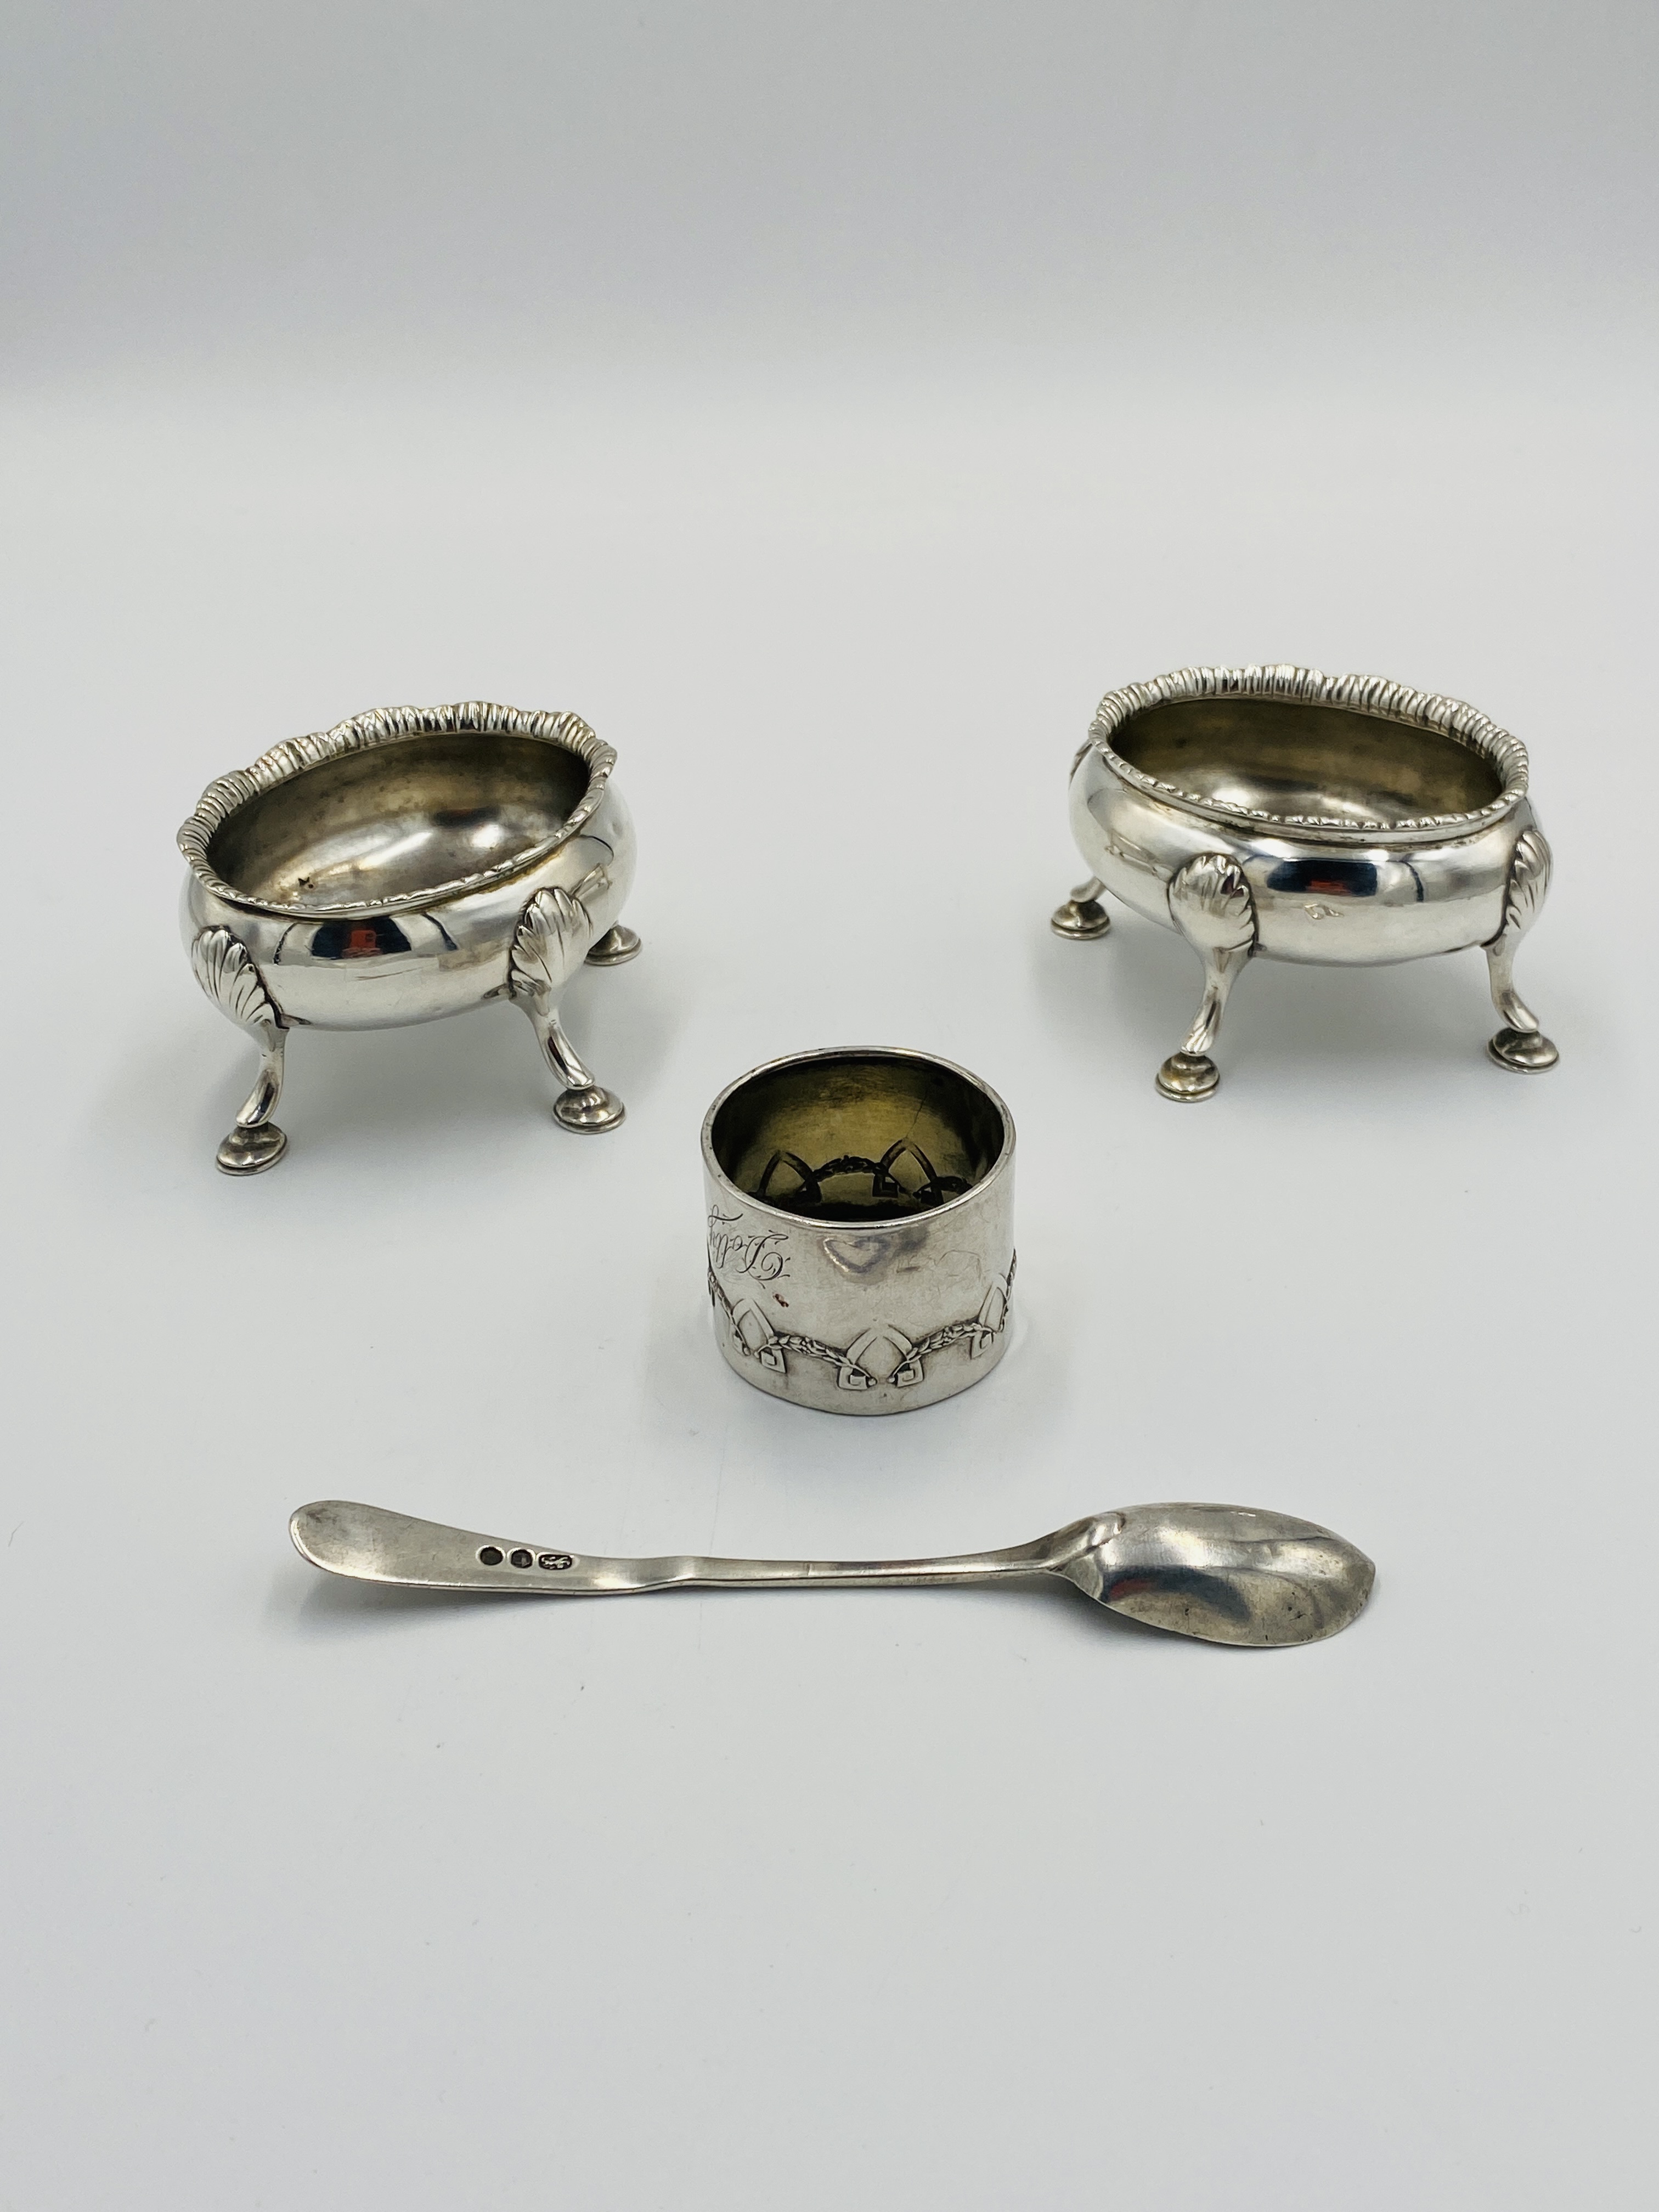 Two silver salts and a silver napkin ring - Image 4 of 6